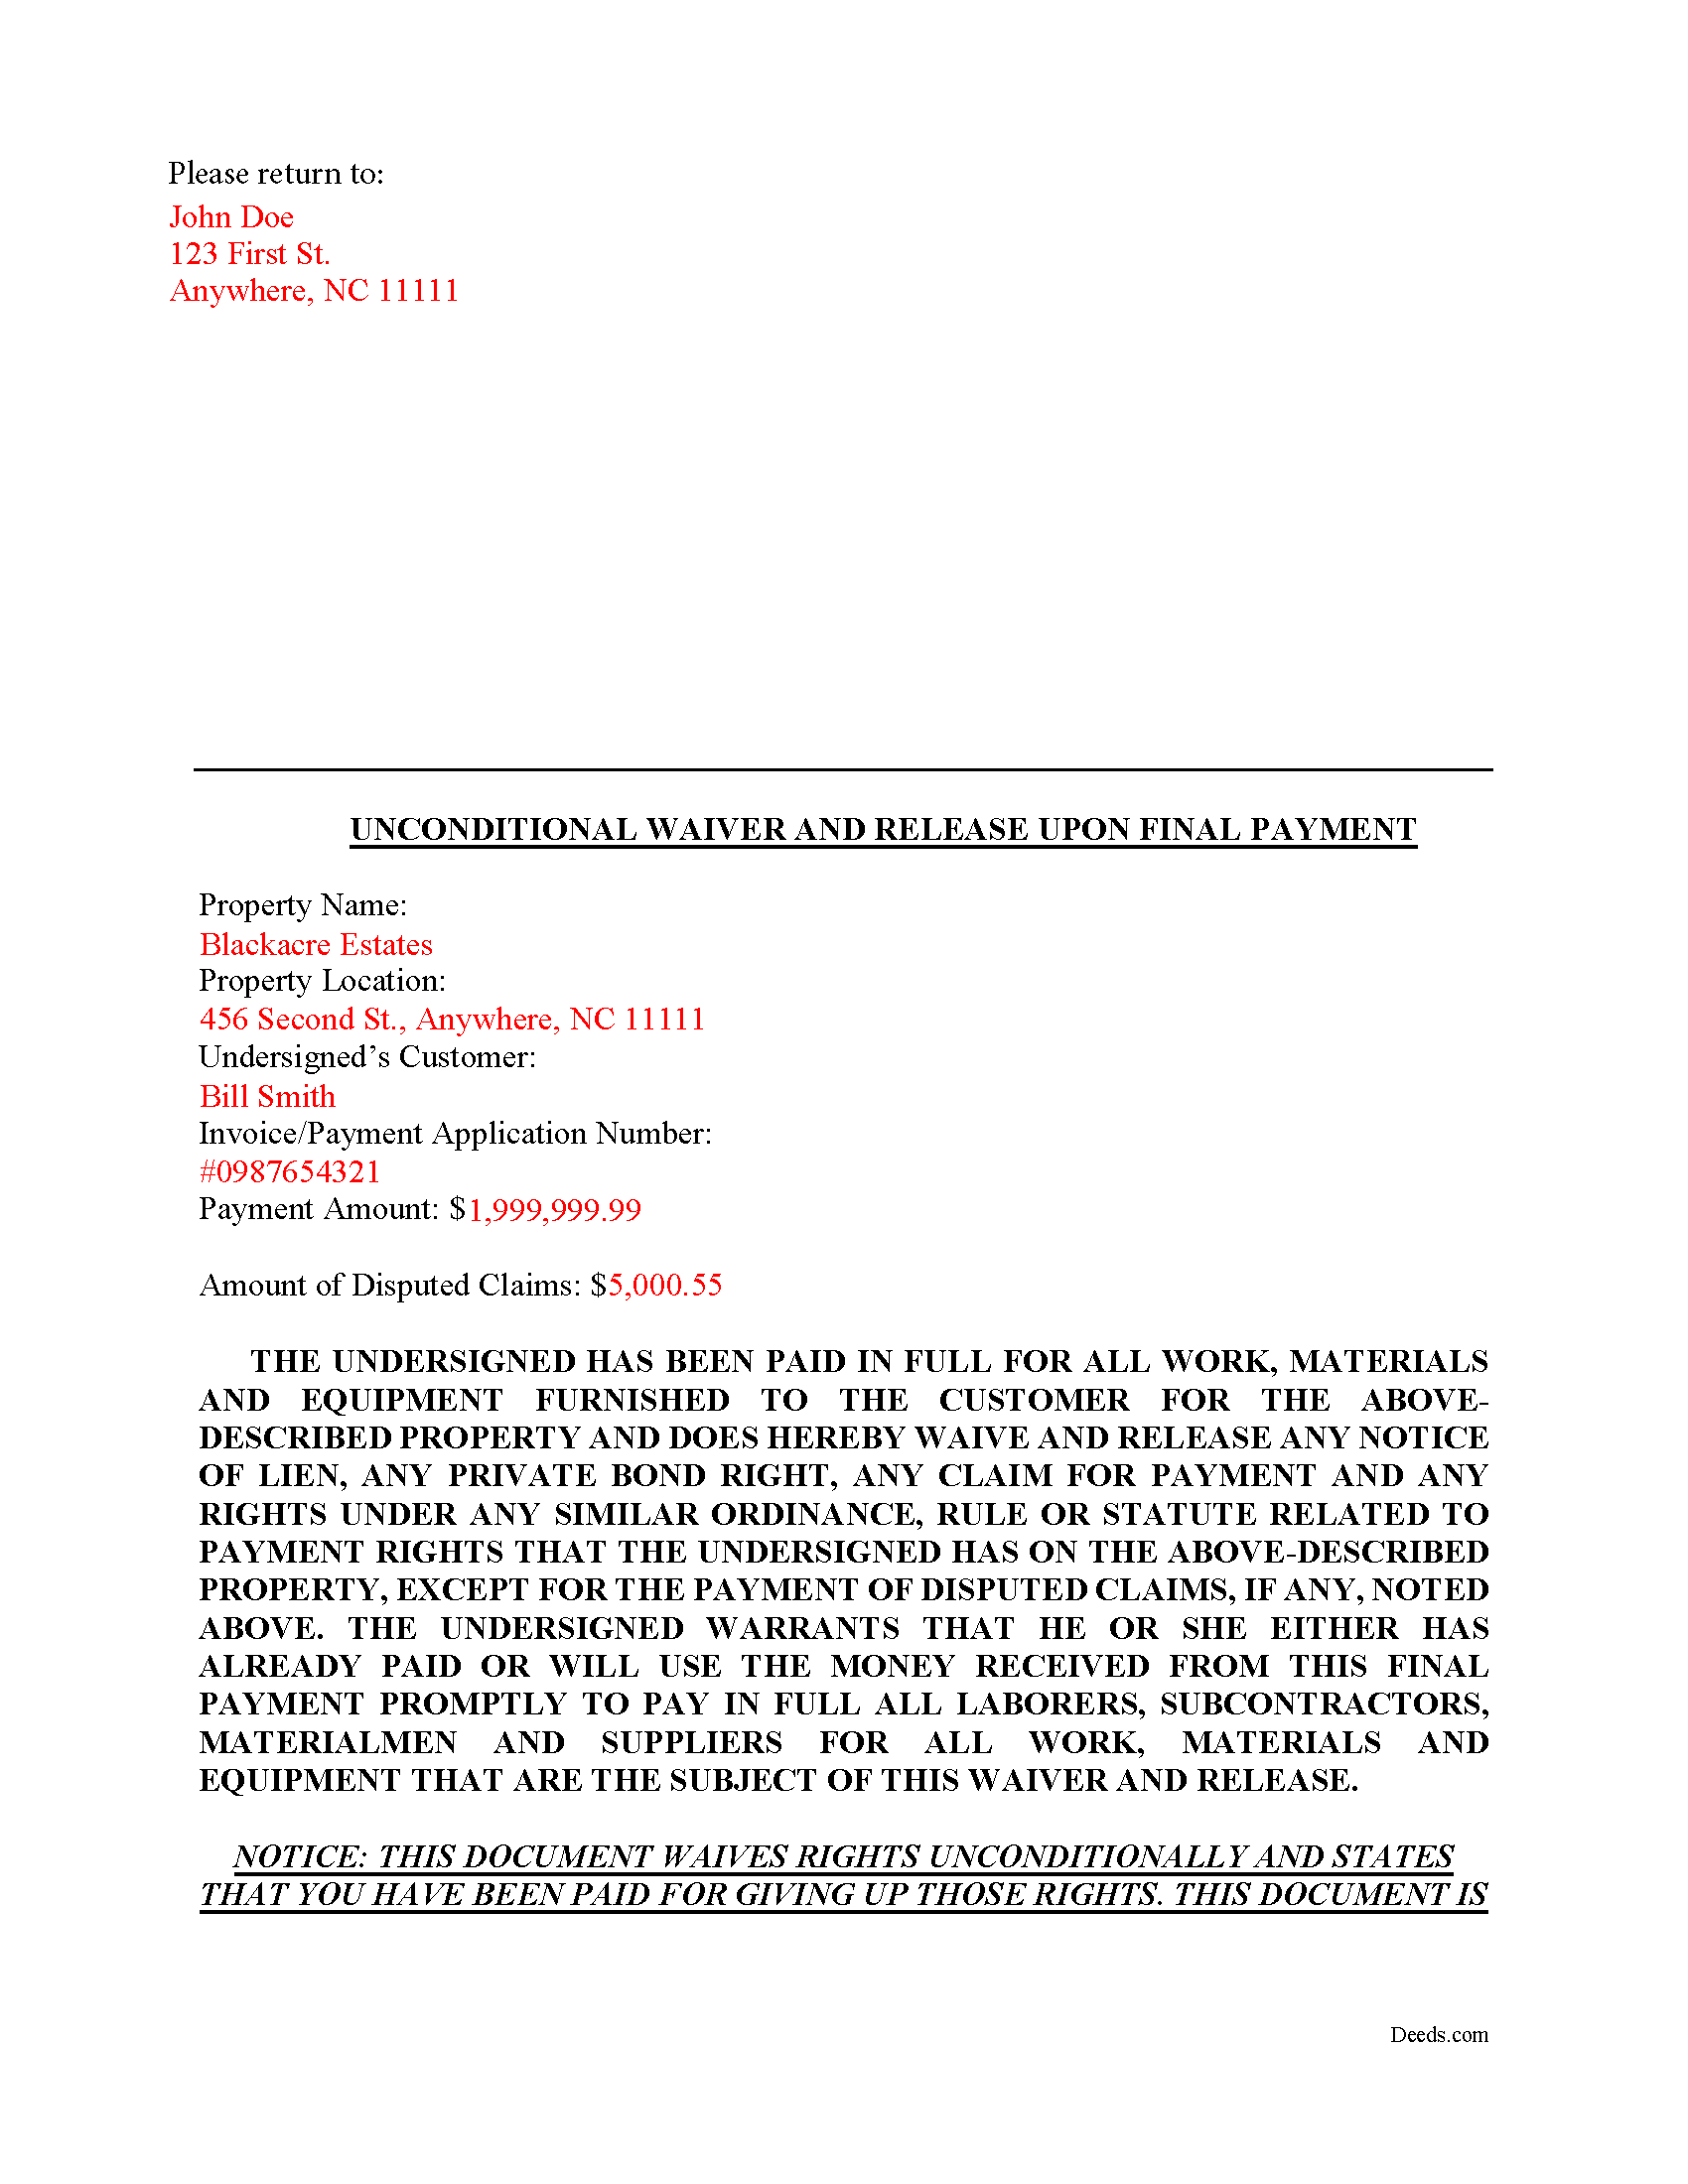 Completed Example of the Unconditional Waiver upon Final Payment Document